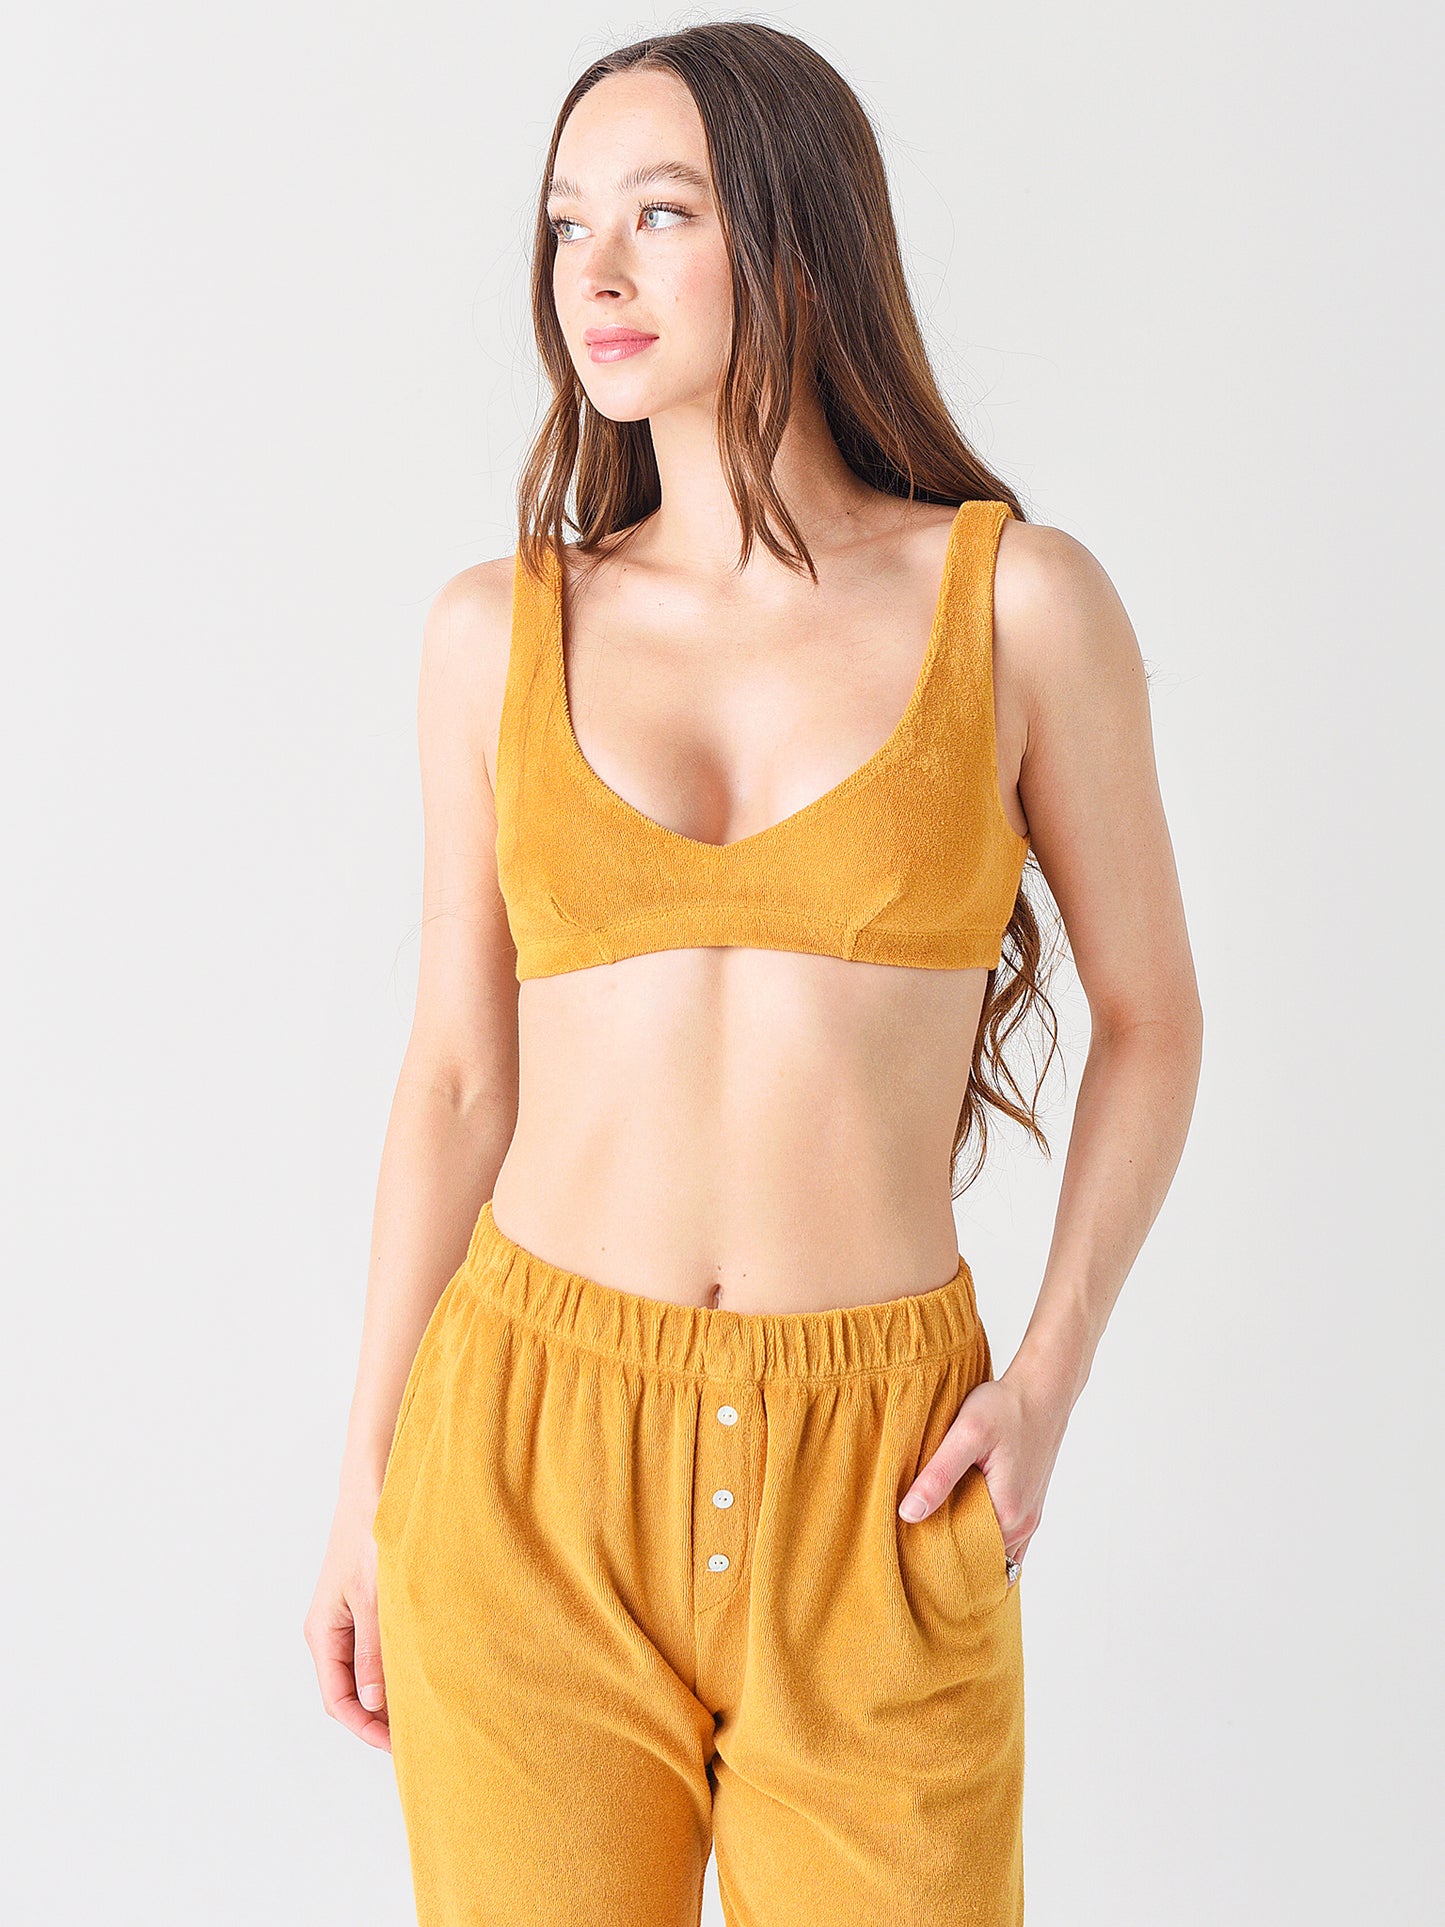 DONNI. Women's The Terry Bralette